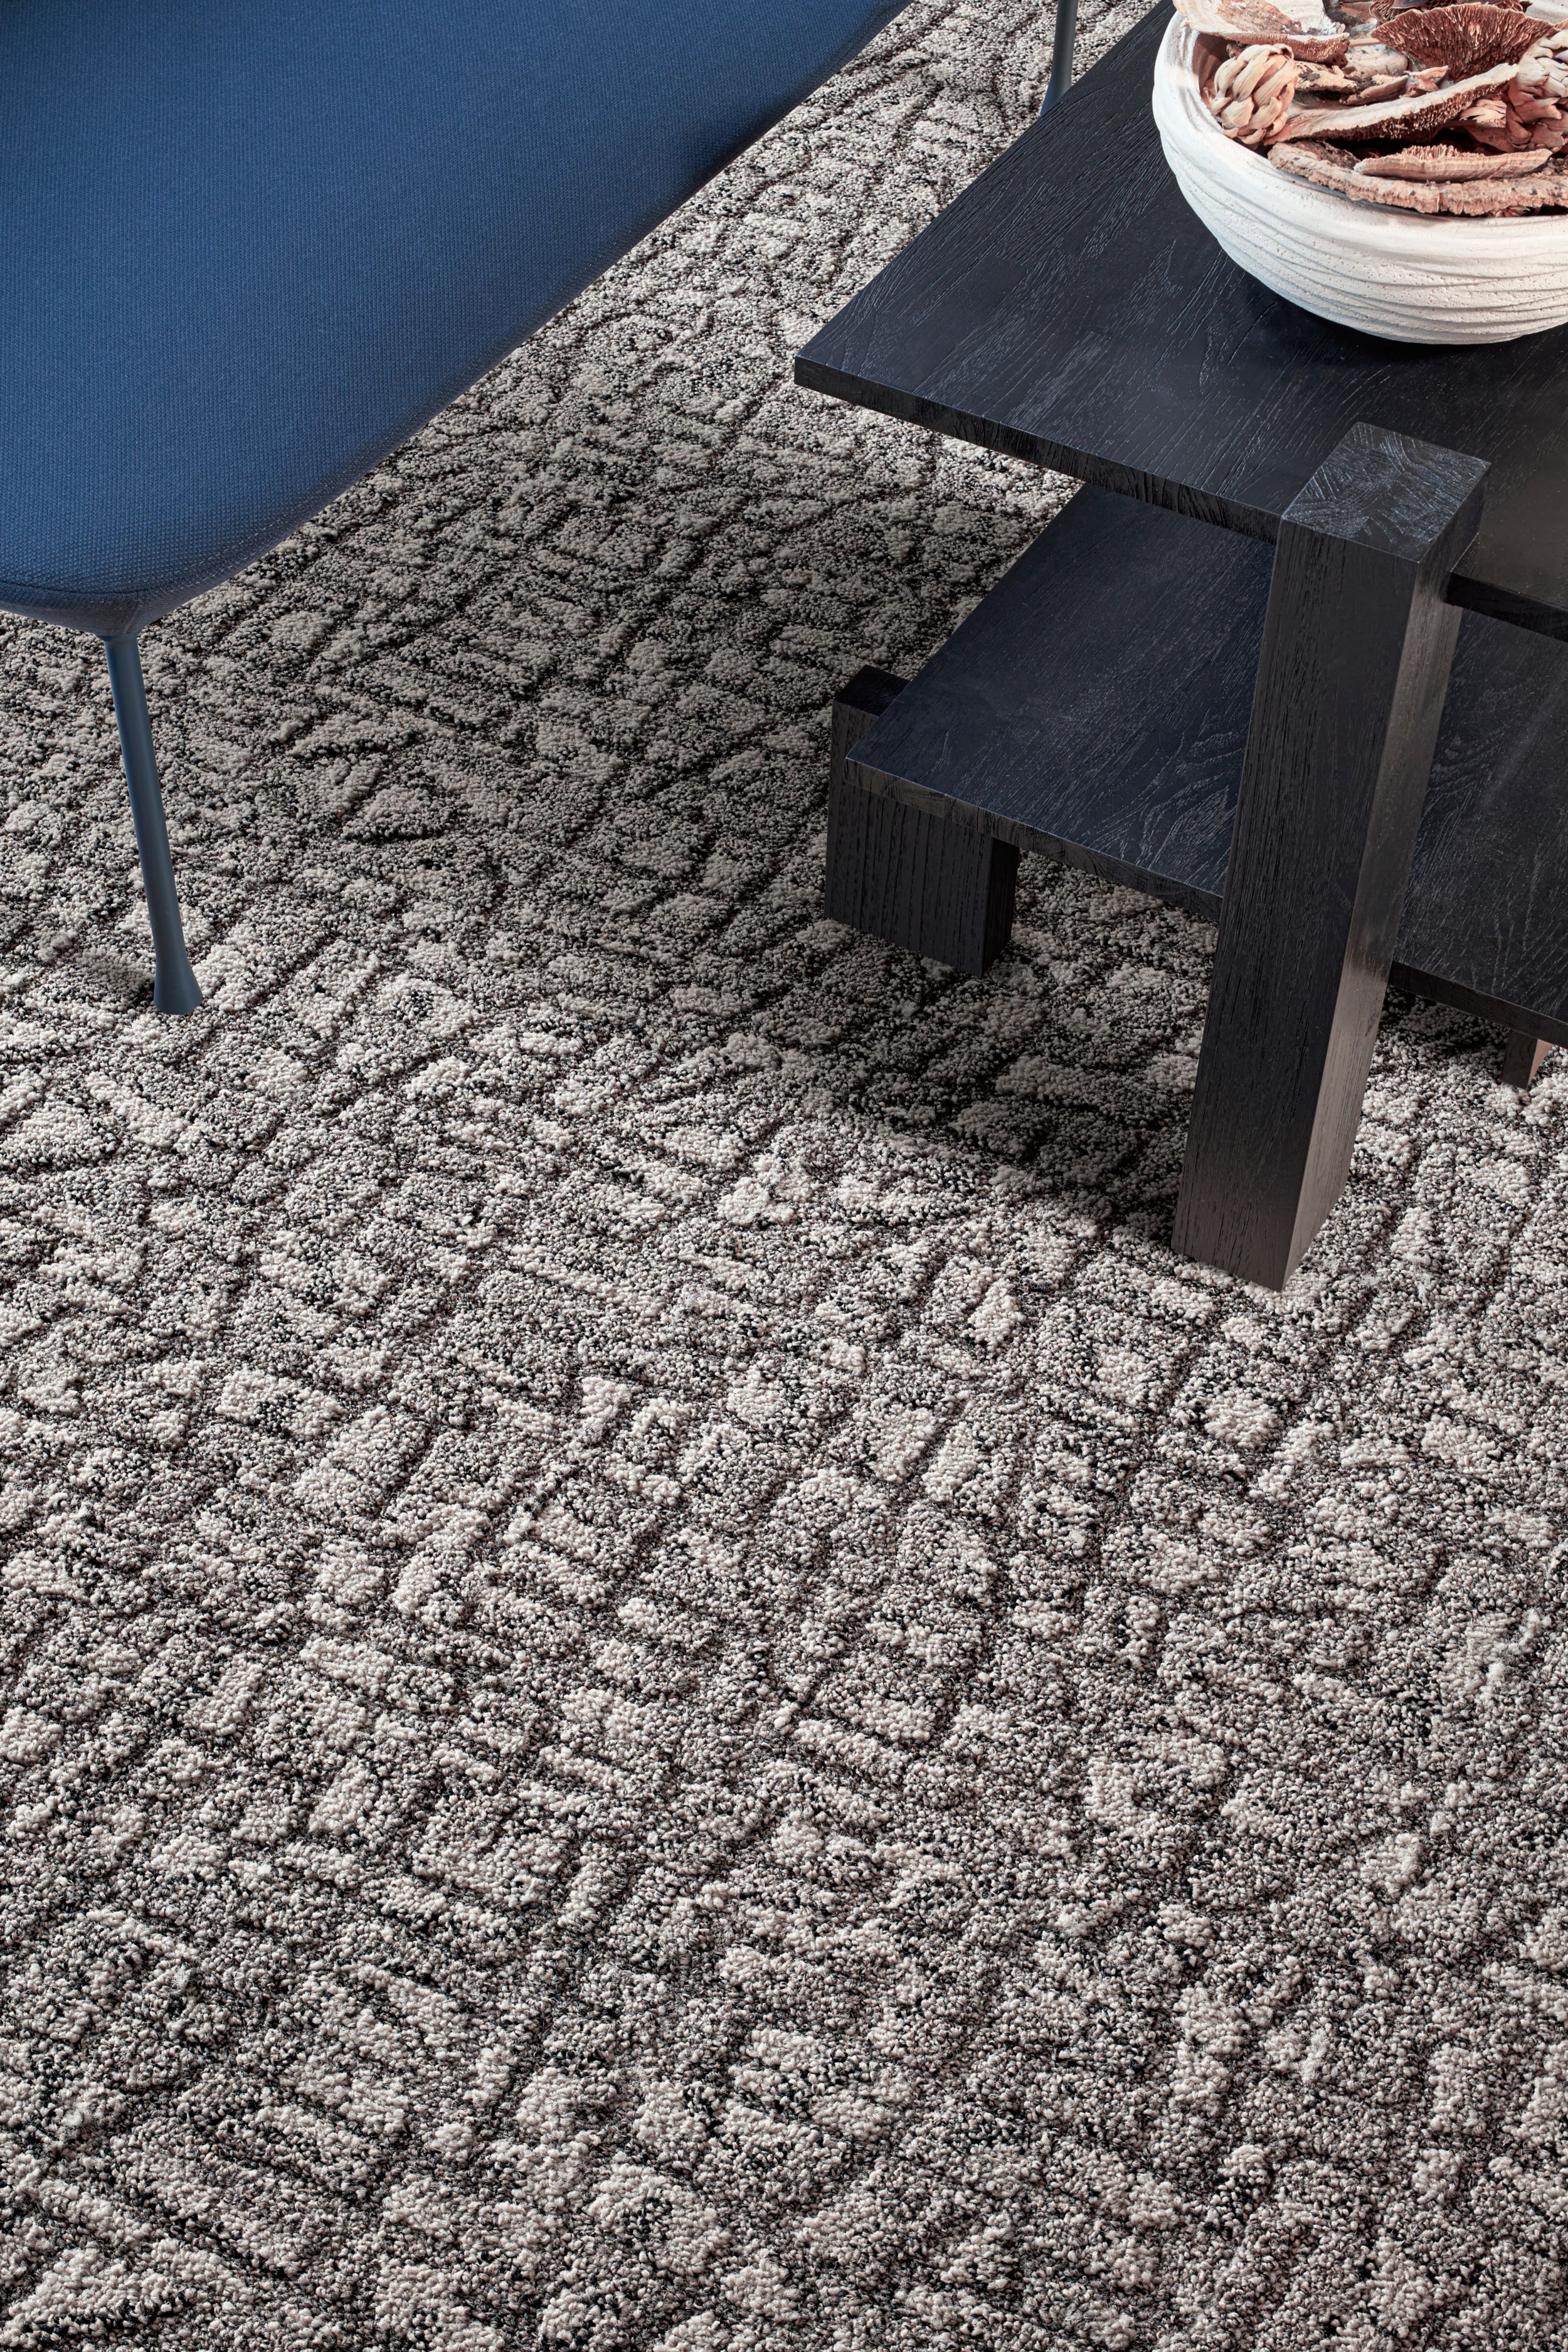 Interface E610 carpet tile in lobby with blue bench and dark wood table número de imagen 3